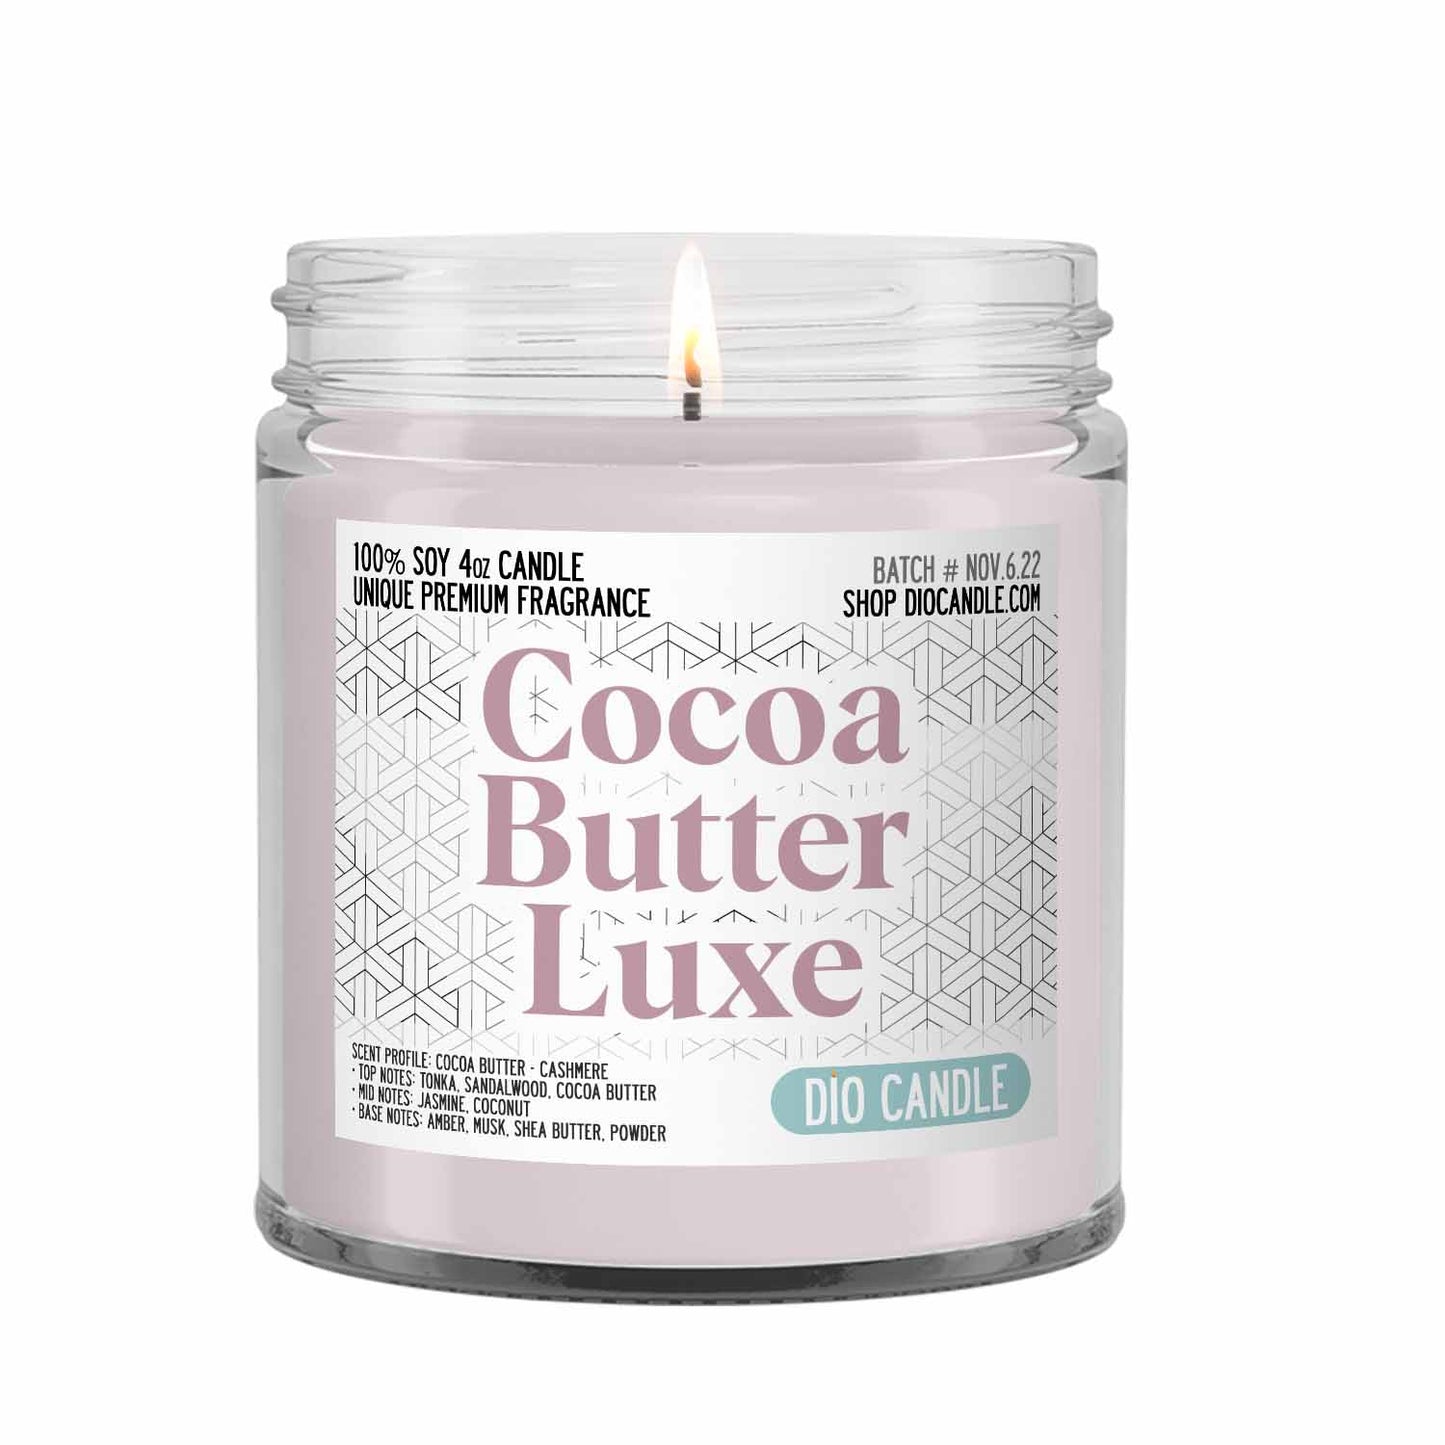 Cocoa Butter Luxe Candle